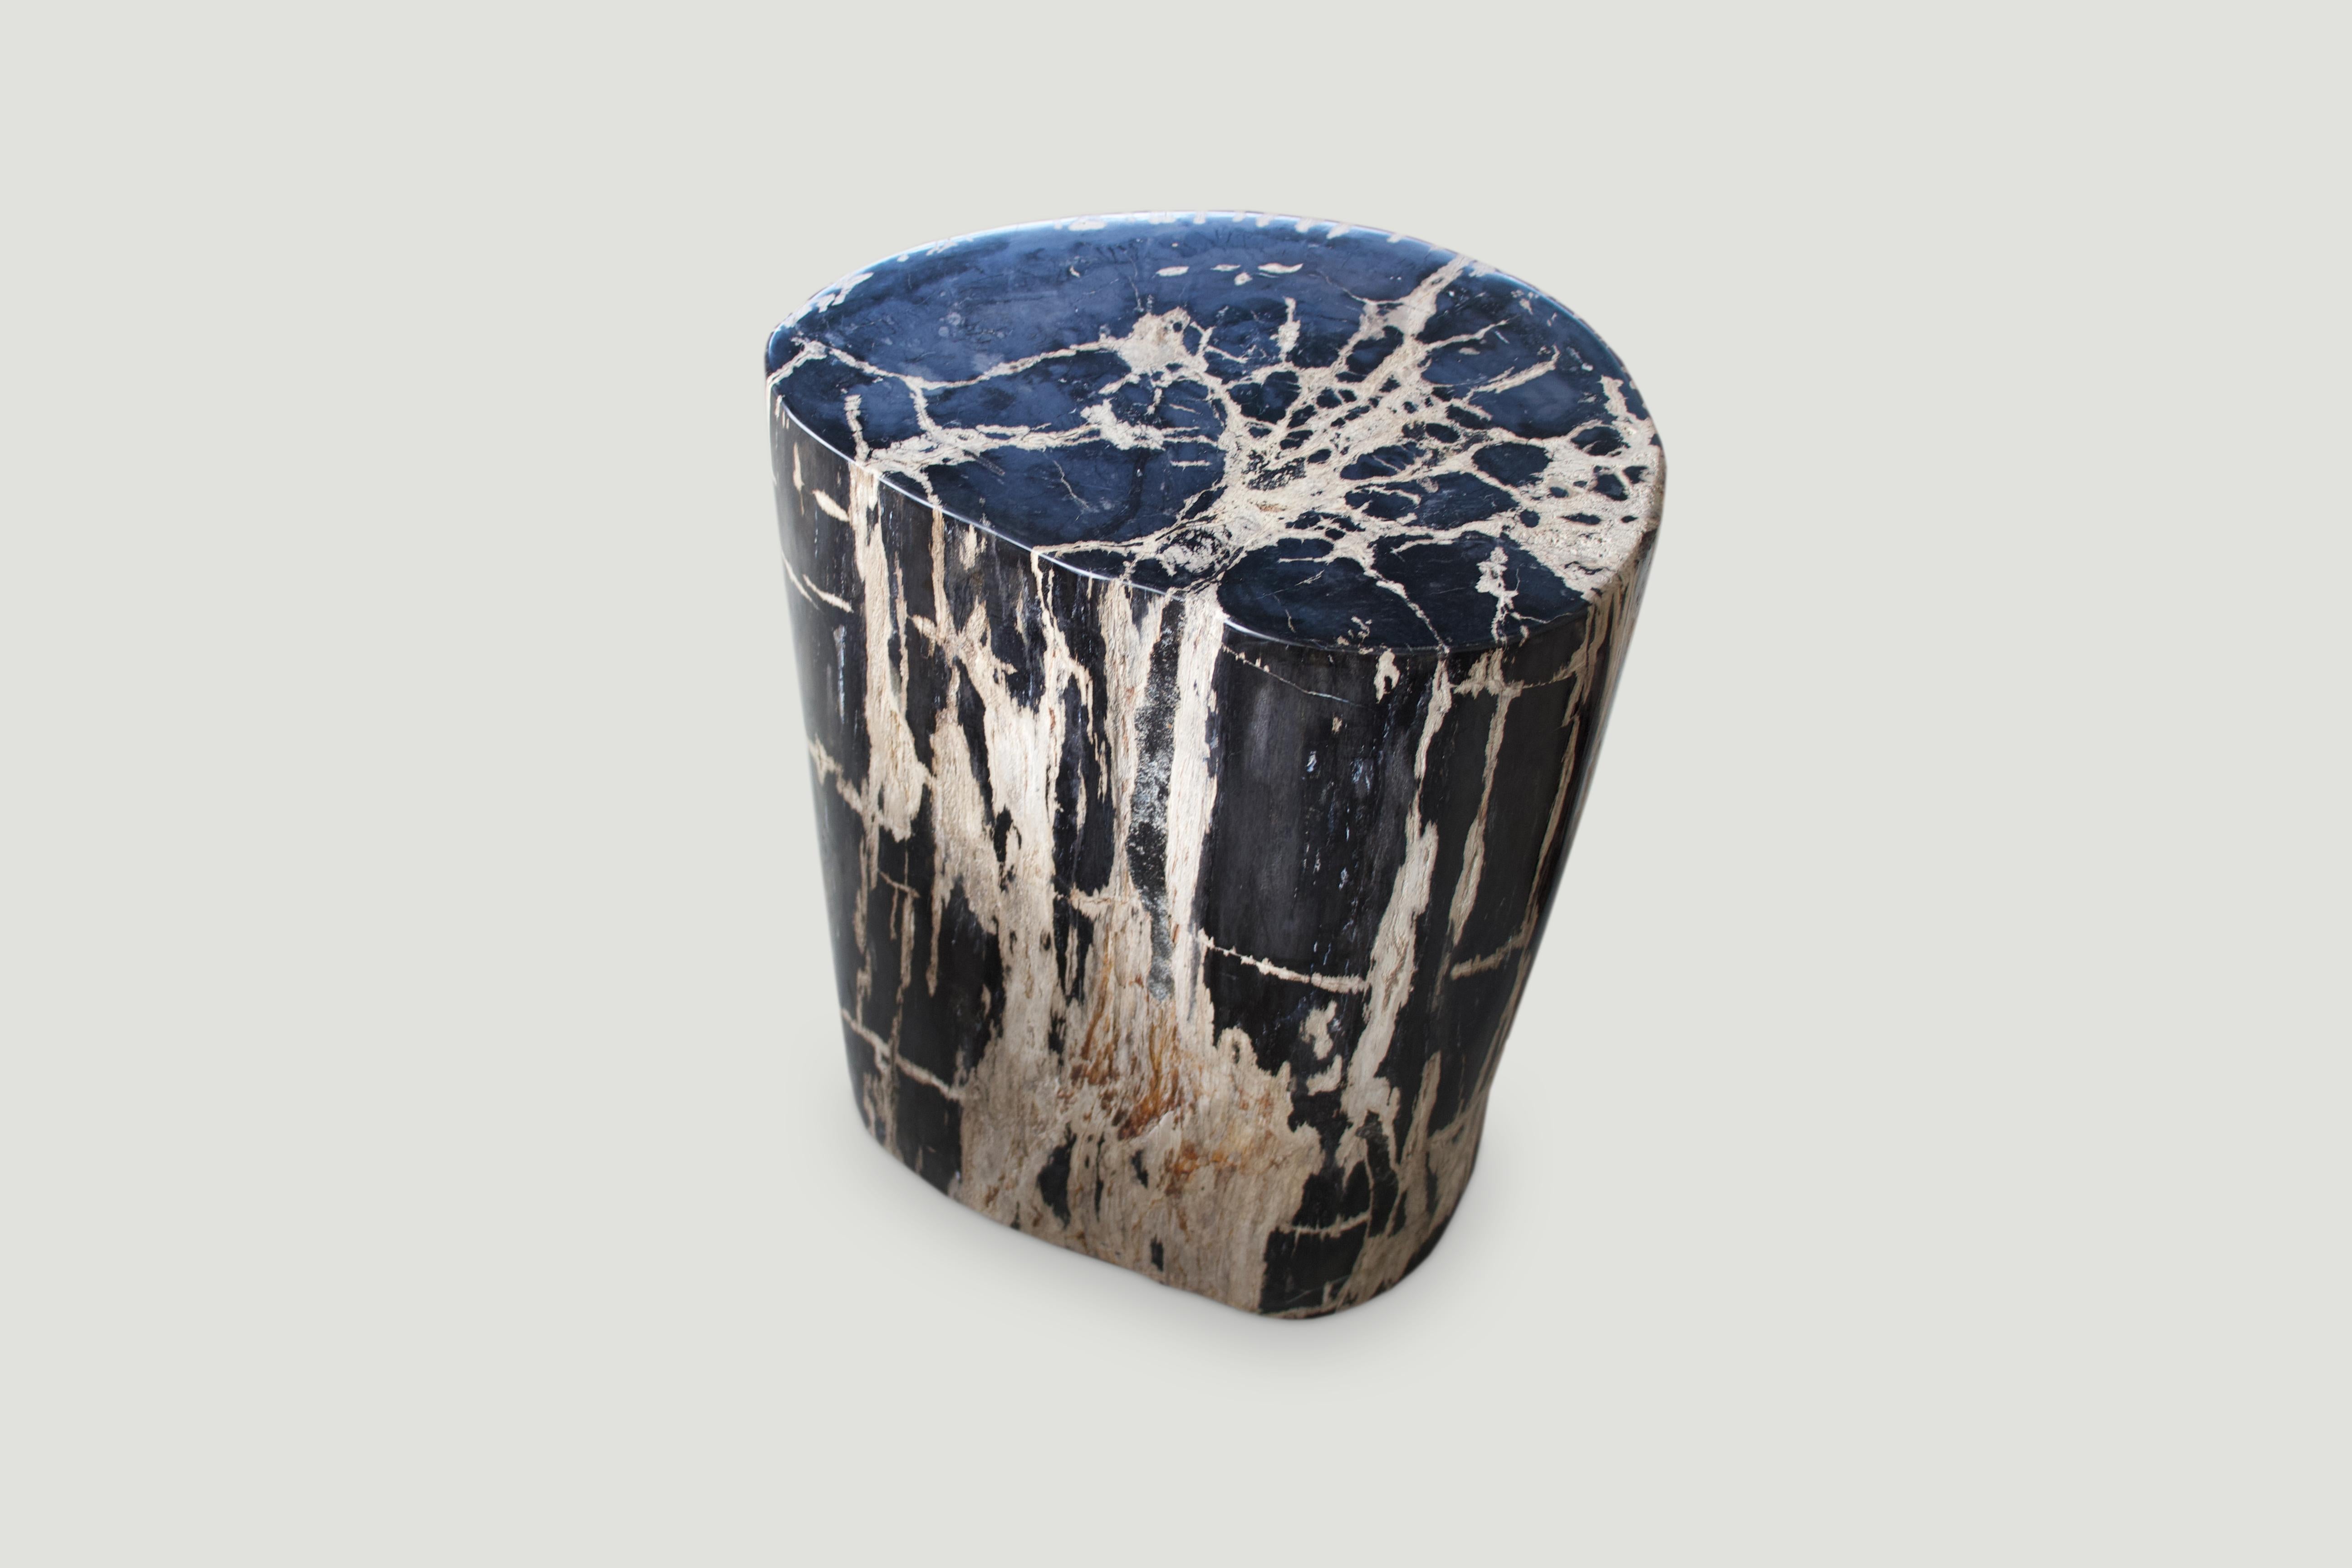 Stunning, black and beige, high quality petrified wood side table. It’s fascinating how Mother Nature produces these stunning 40 million year old petrified teak logs with such contrasting colors with natural patterns throughout. Modern yet with so